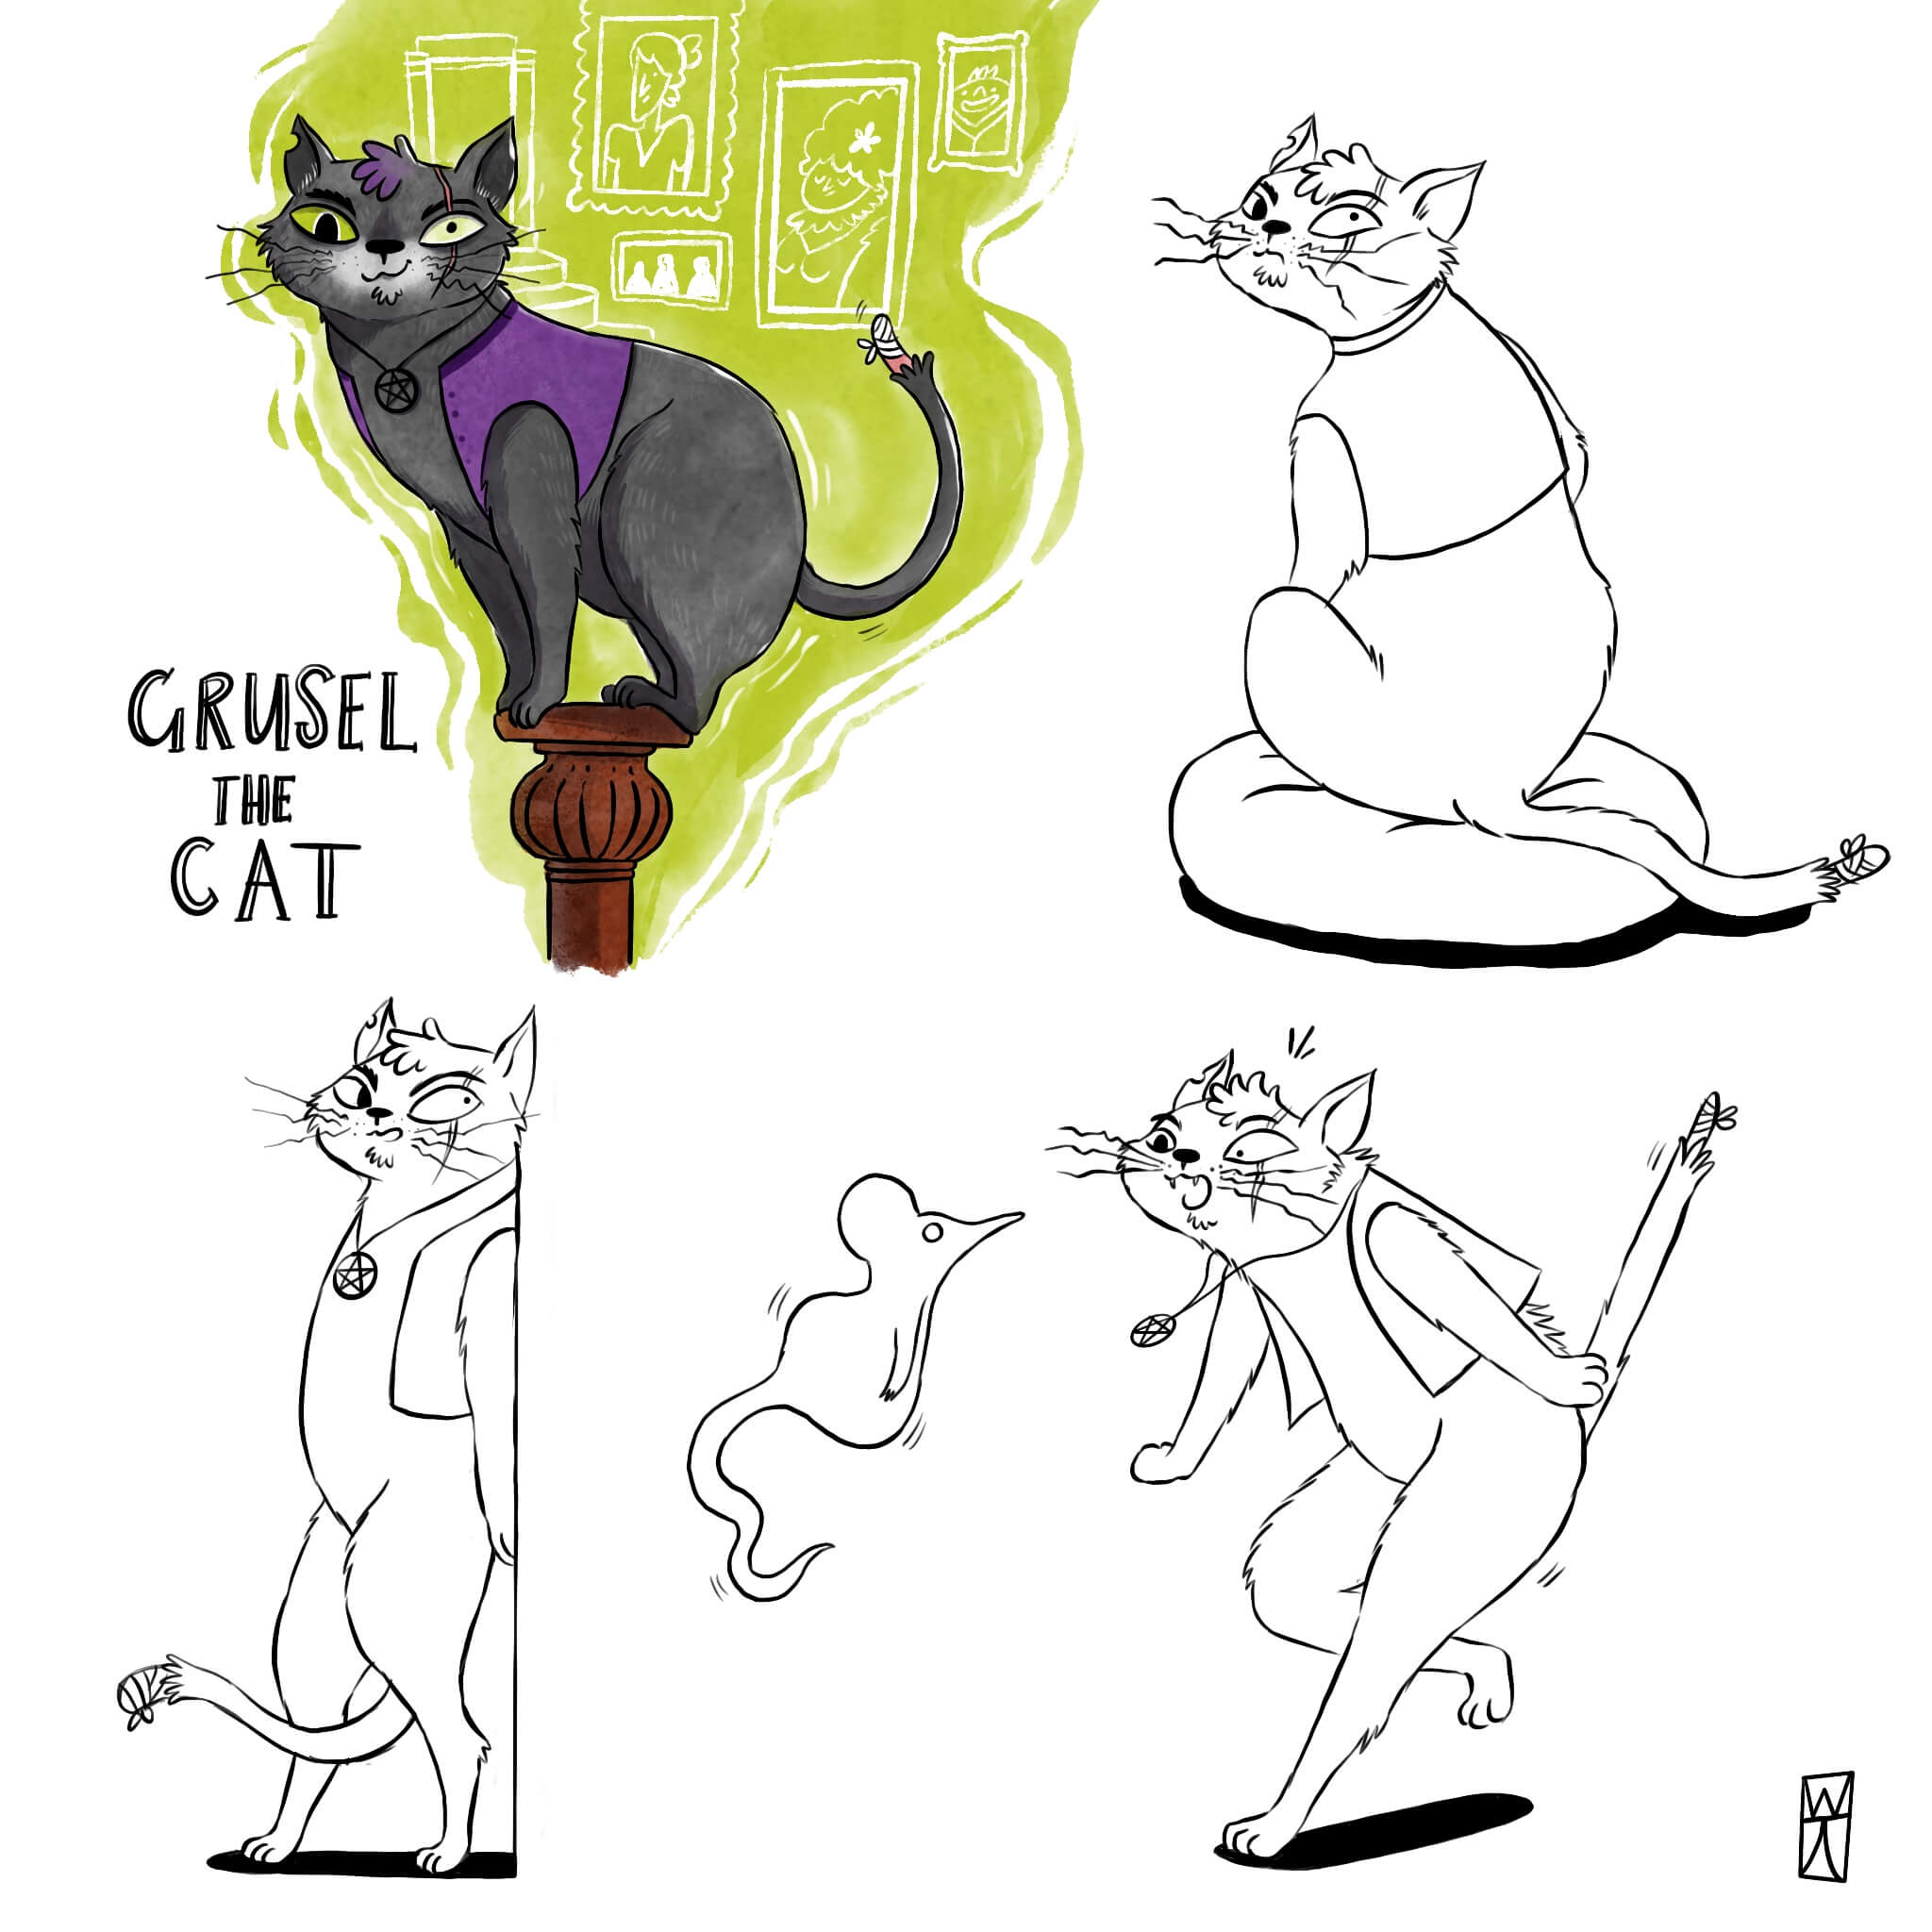 charactersheet of a cat named grusel